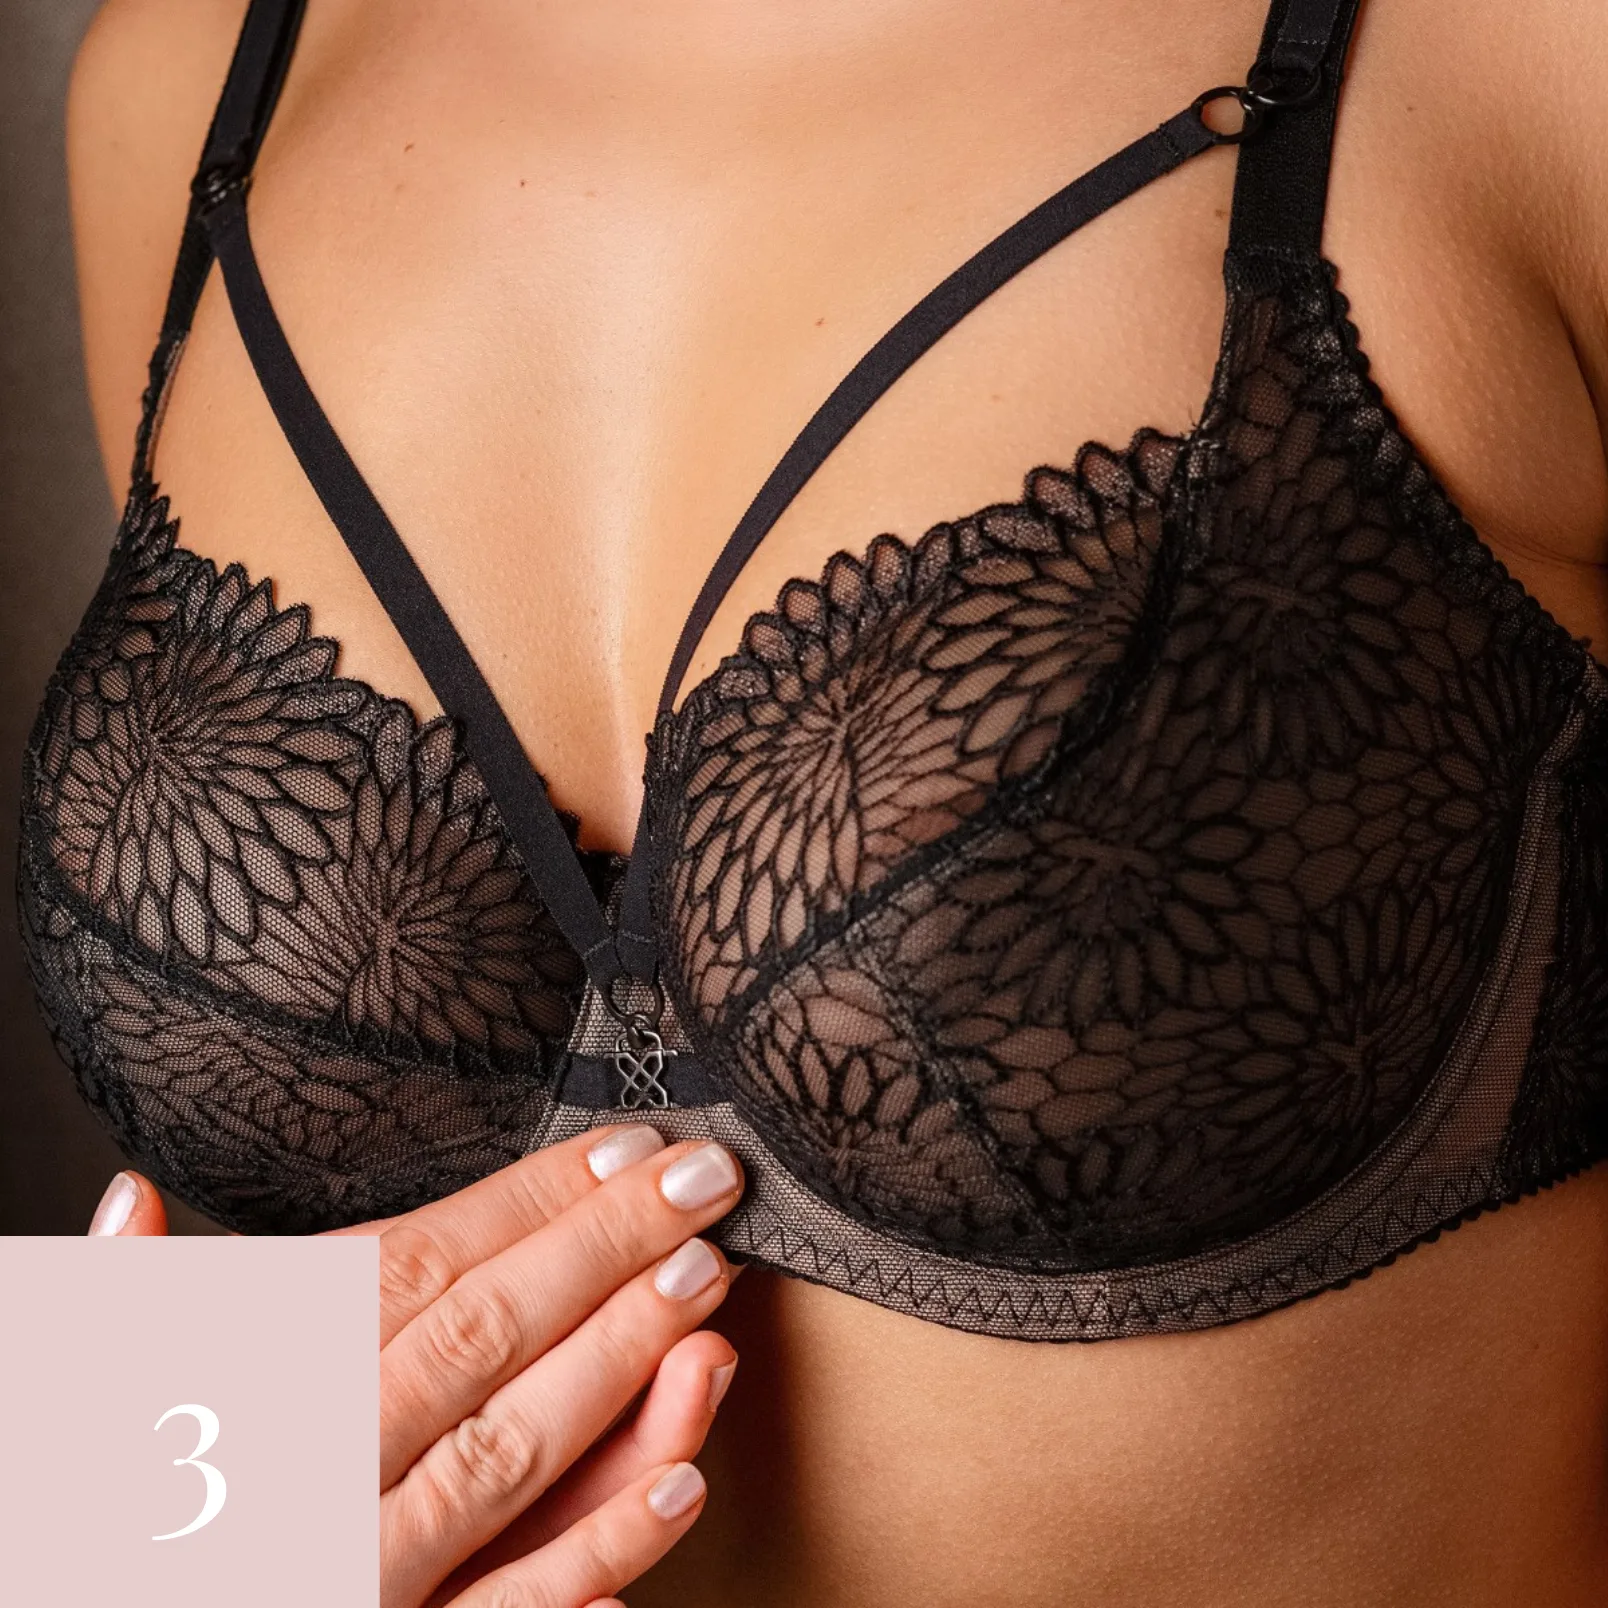 Are you wearing the right bra size? Six checks!